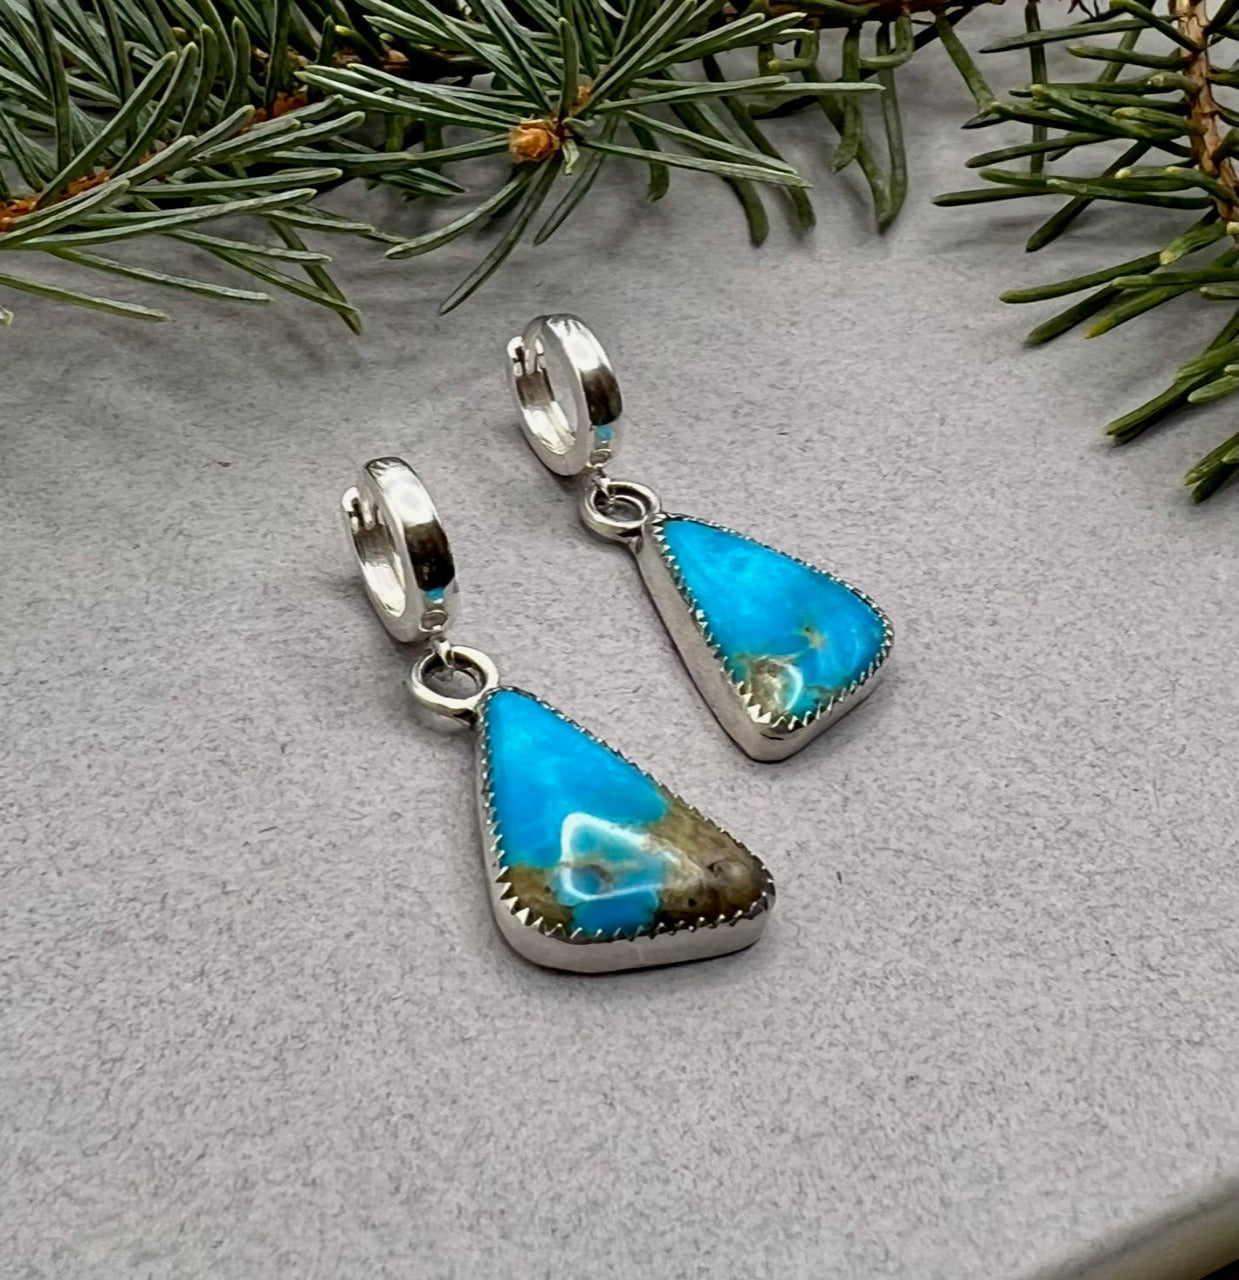 Blue Turquoise Dangle Earrings with Serrated Bezel